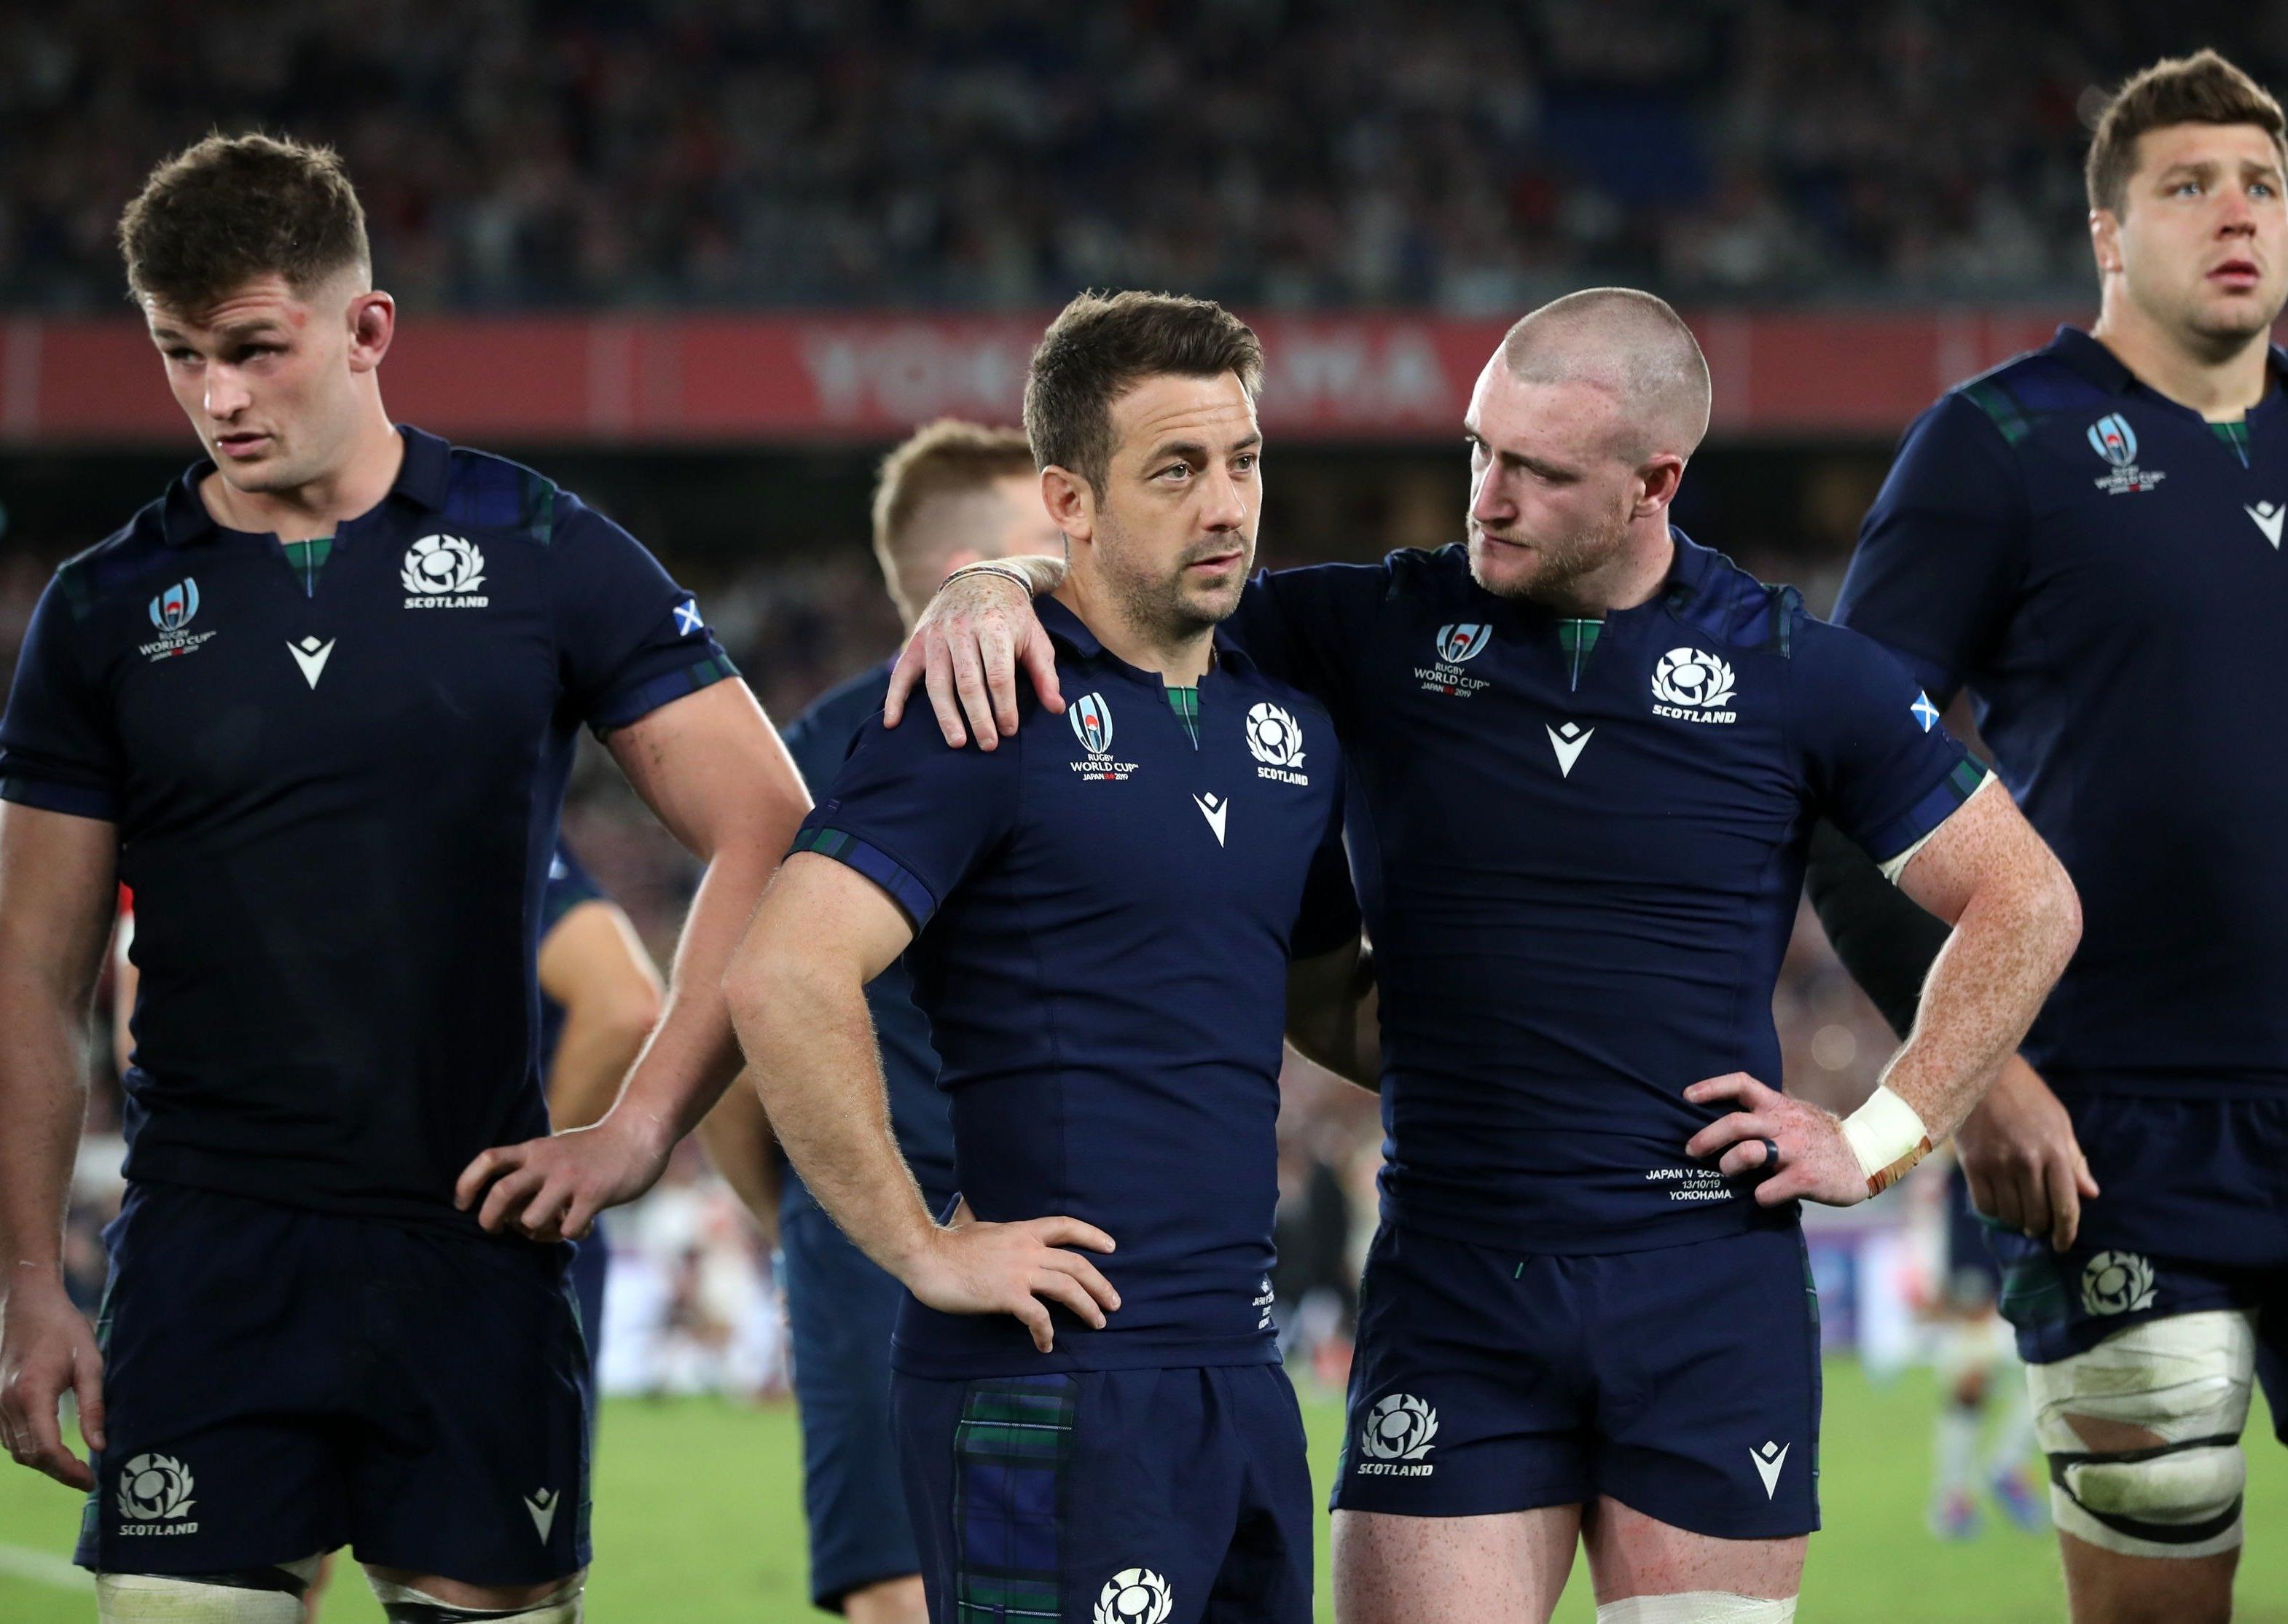 Scotland's Greig Laidlaw and Stuart Hogg after the defeat during the 2019 Rugby World Cup match at the Yokohama Stadium.